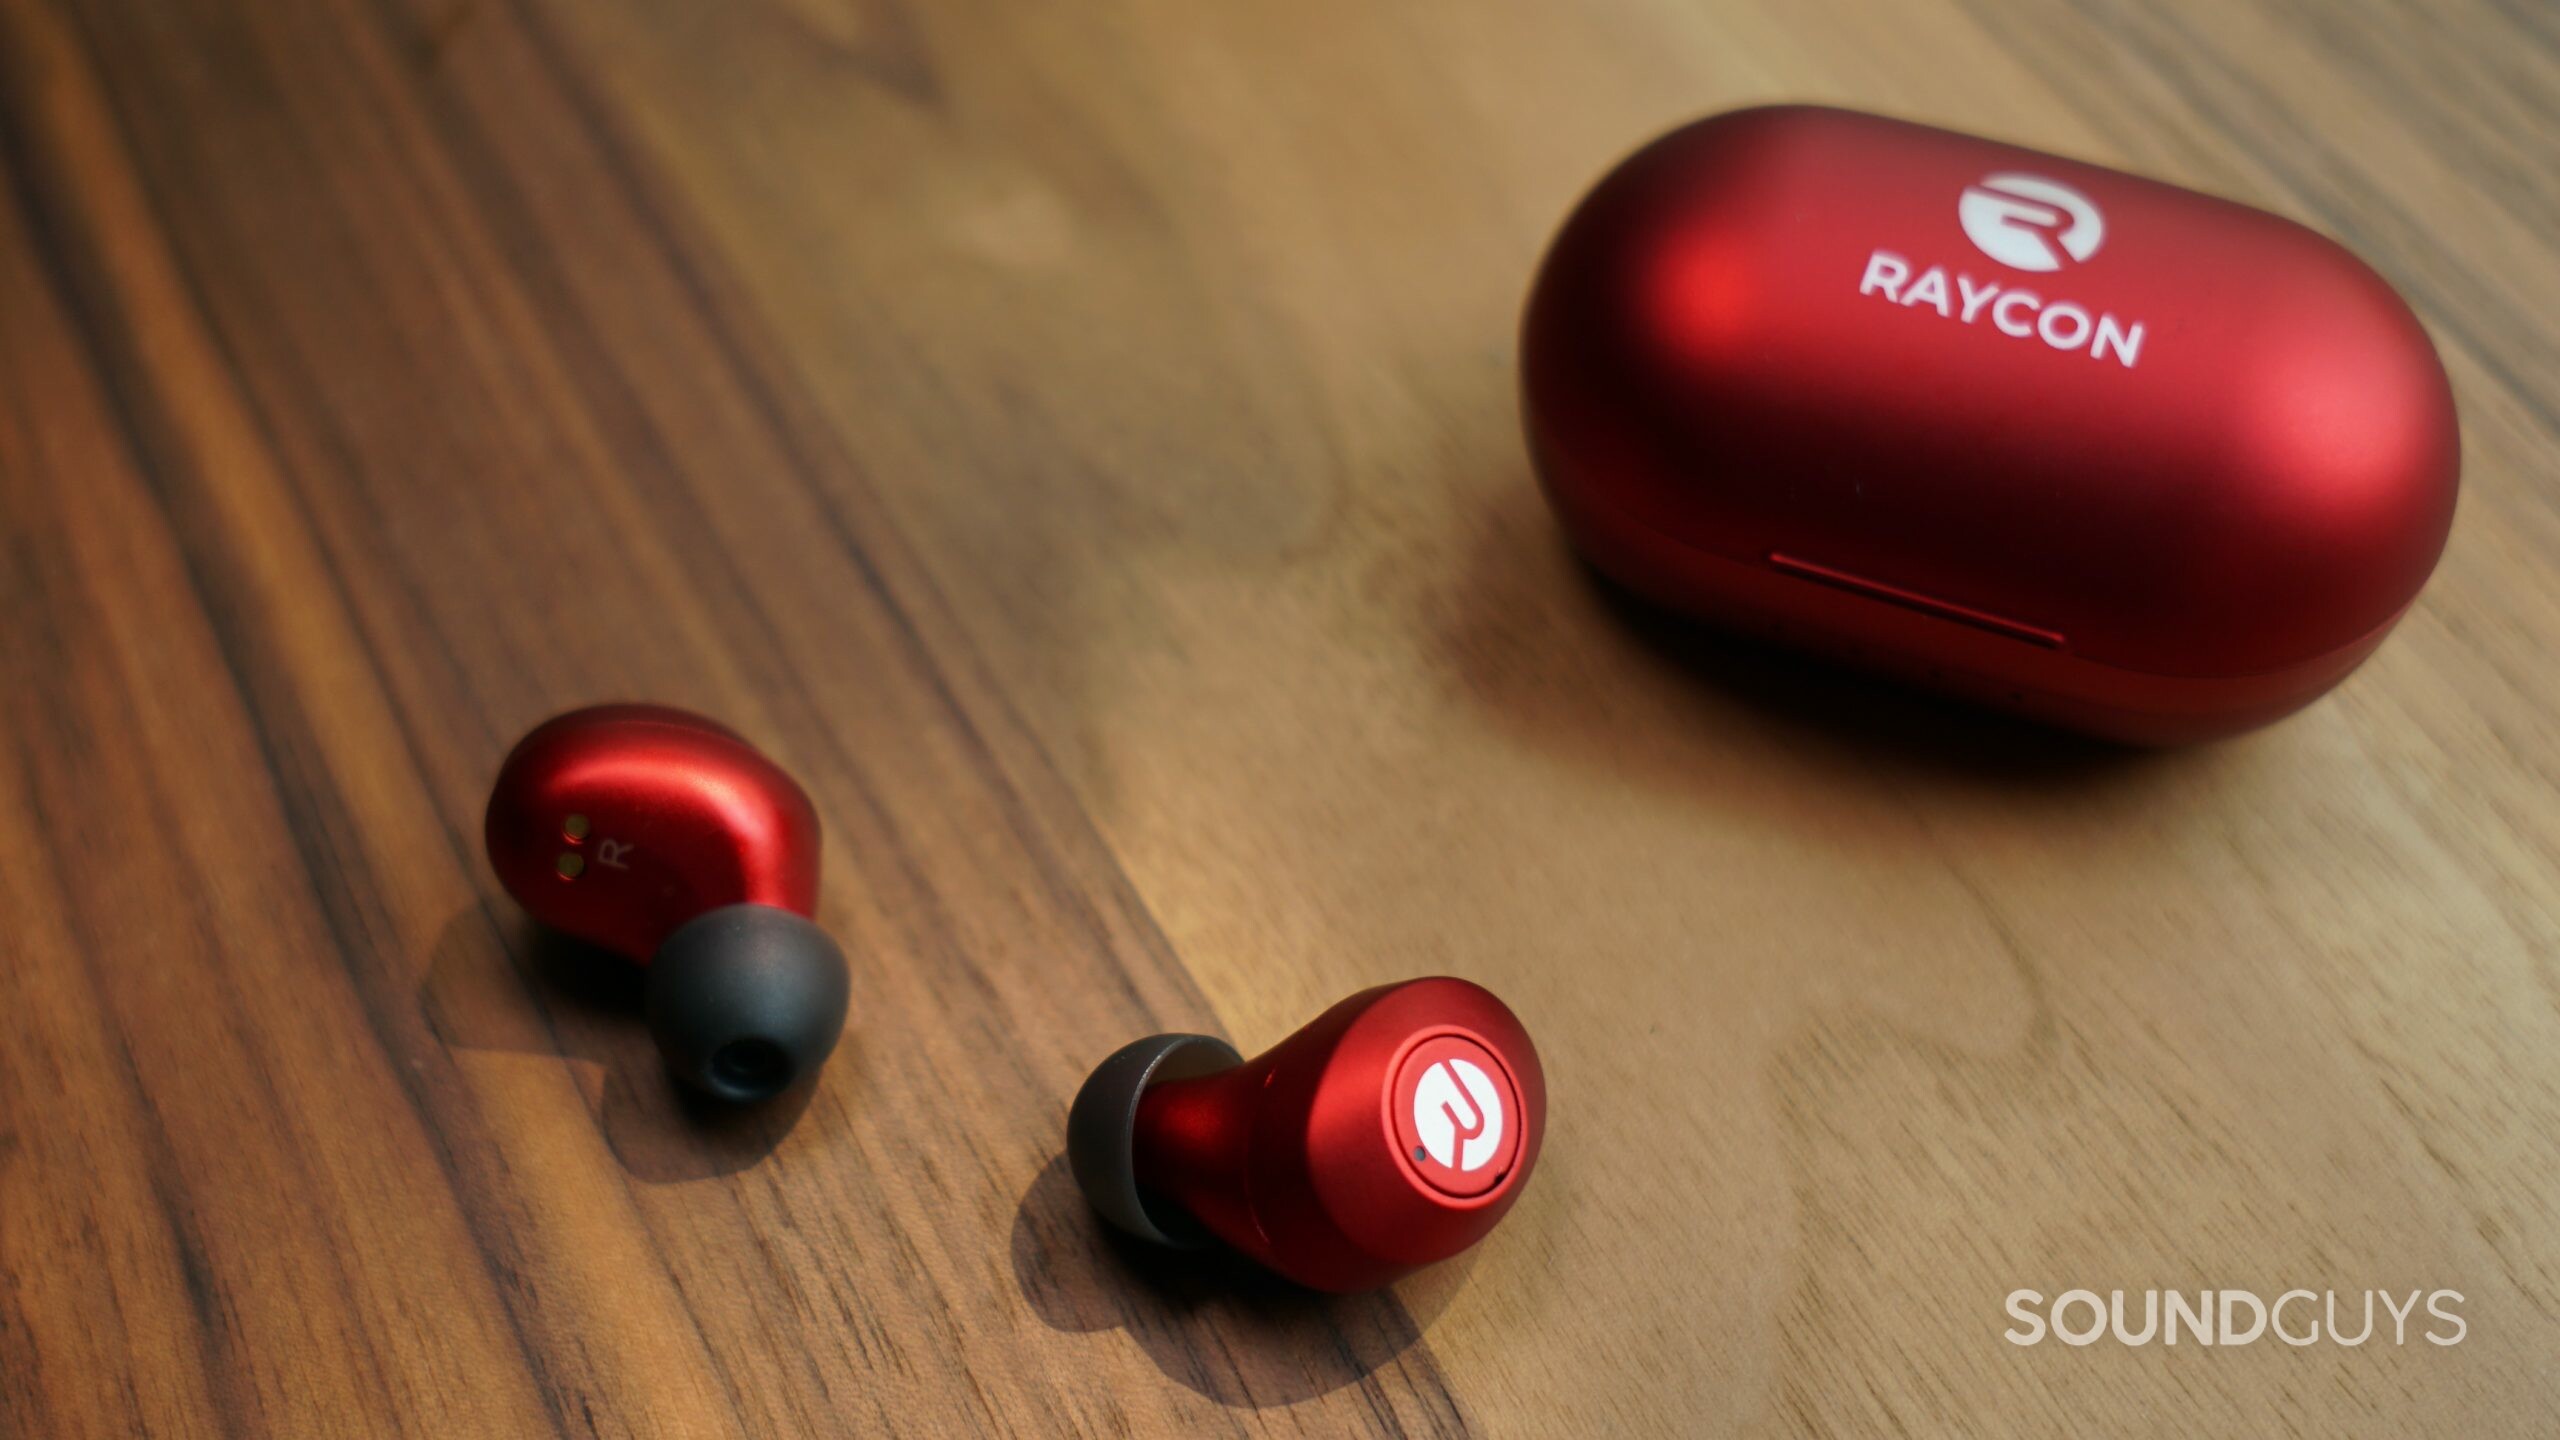 The Raycon Everyday Earbuds sits on a wooden table, with the earbuds laying next to the charging case.